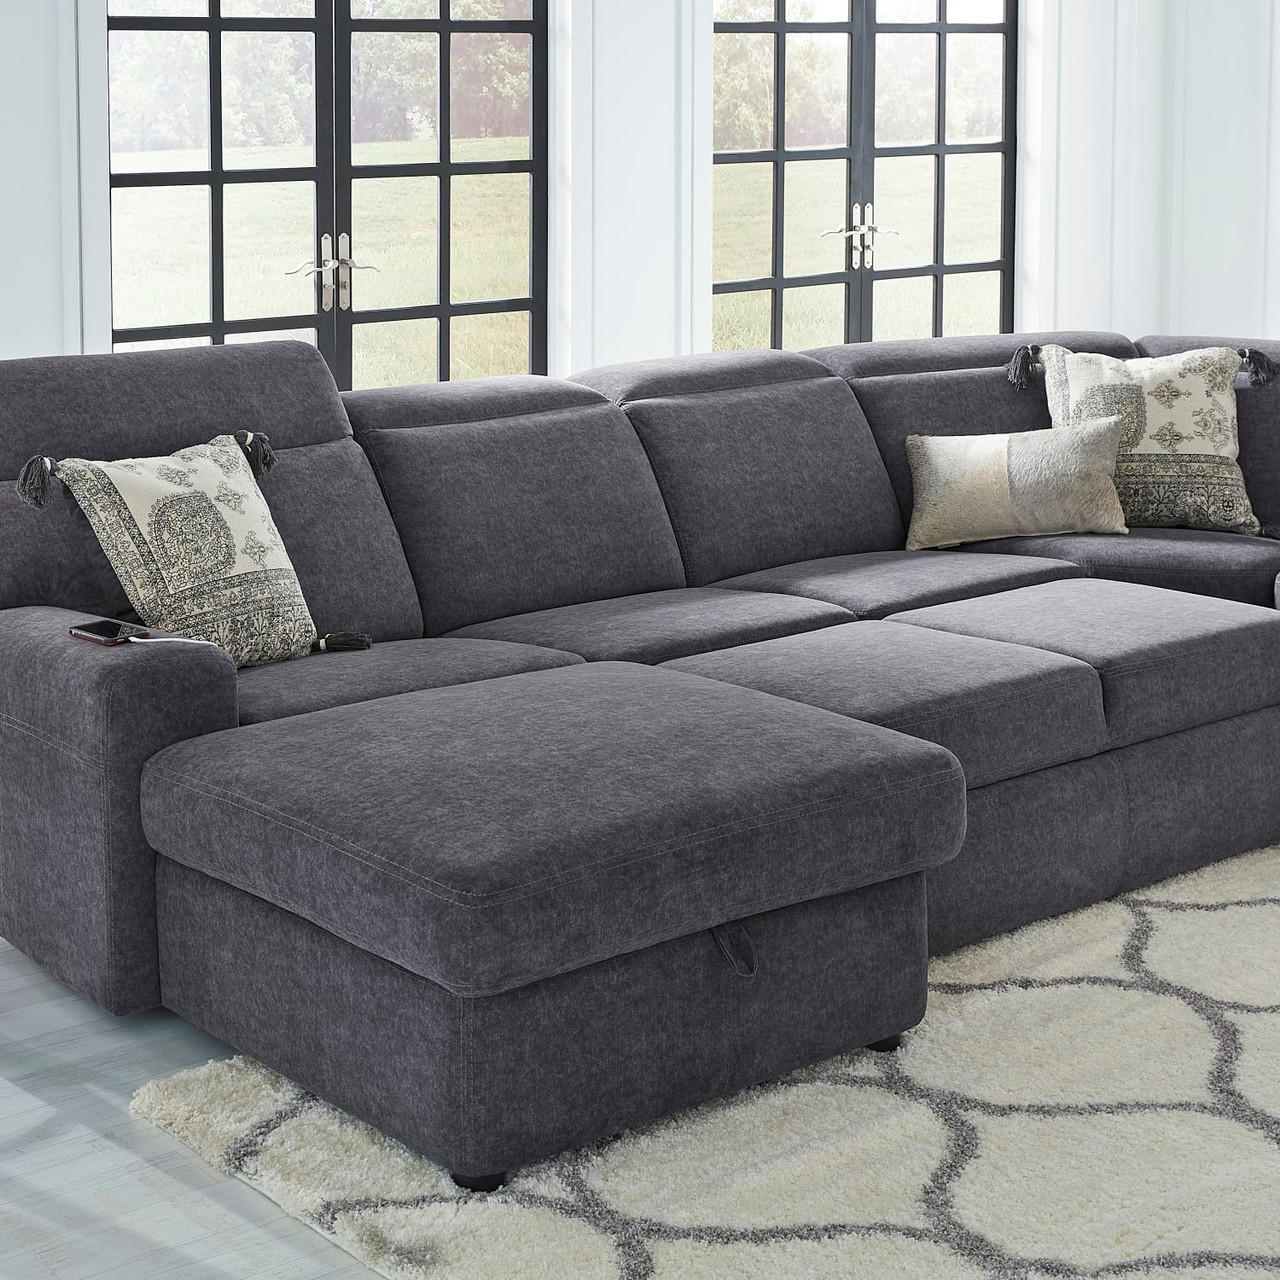 Glendale 4Pc Reclining Sectional